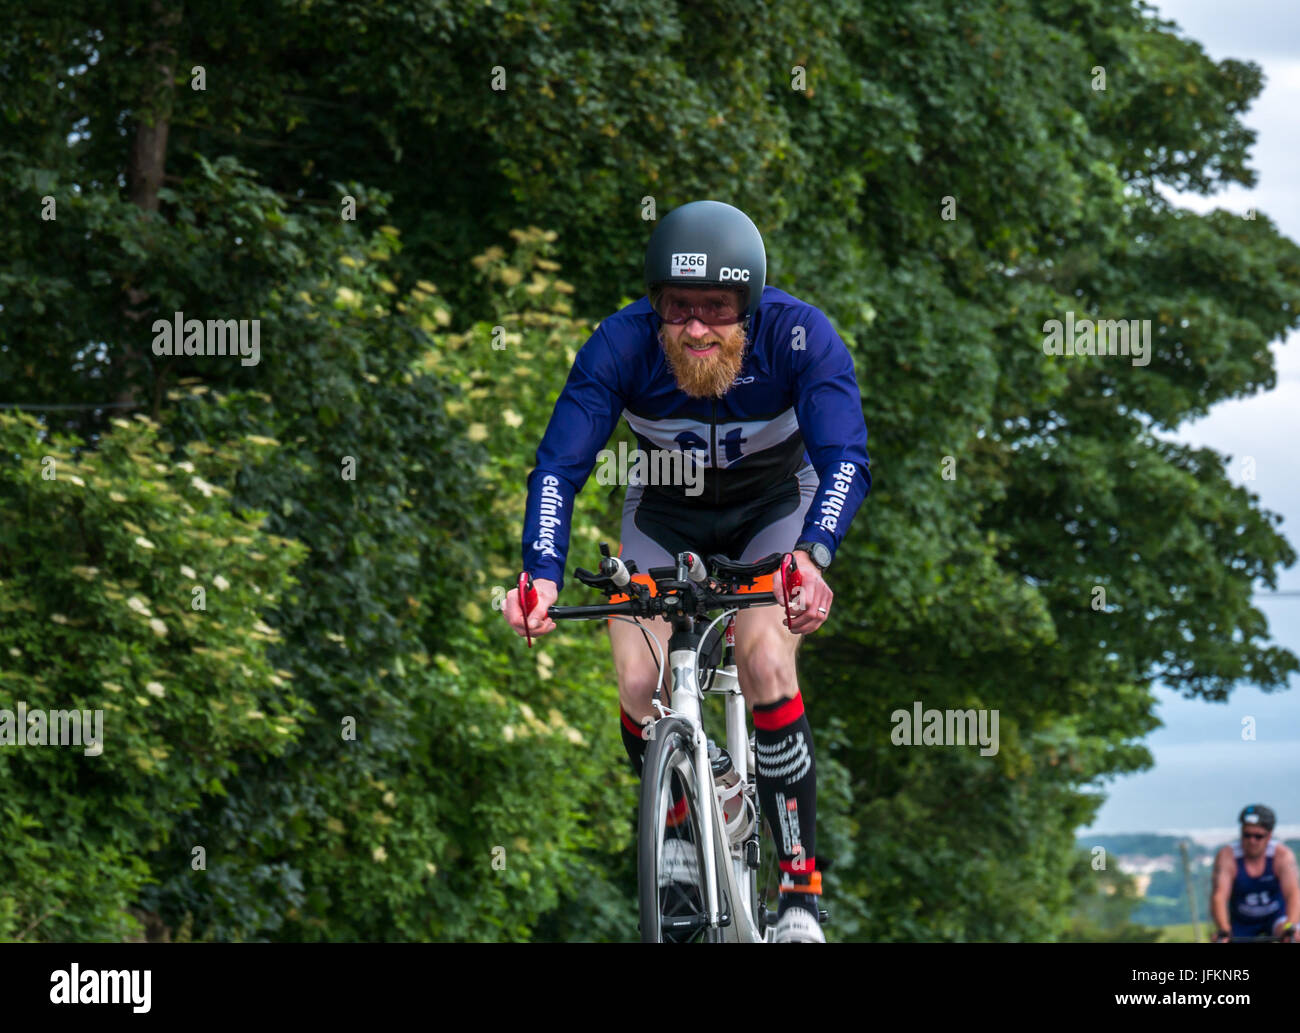 Byres Hill, East Lothian, Scotland, United Kingdom, 2nd July 2017. A cyclist in the cycling event in Edinburgh Ironman 70.3 at Byres Hill, East Lothian, Scotland, UK Stock Photo